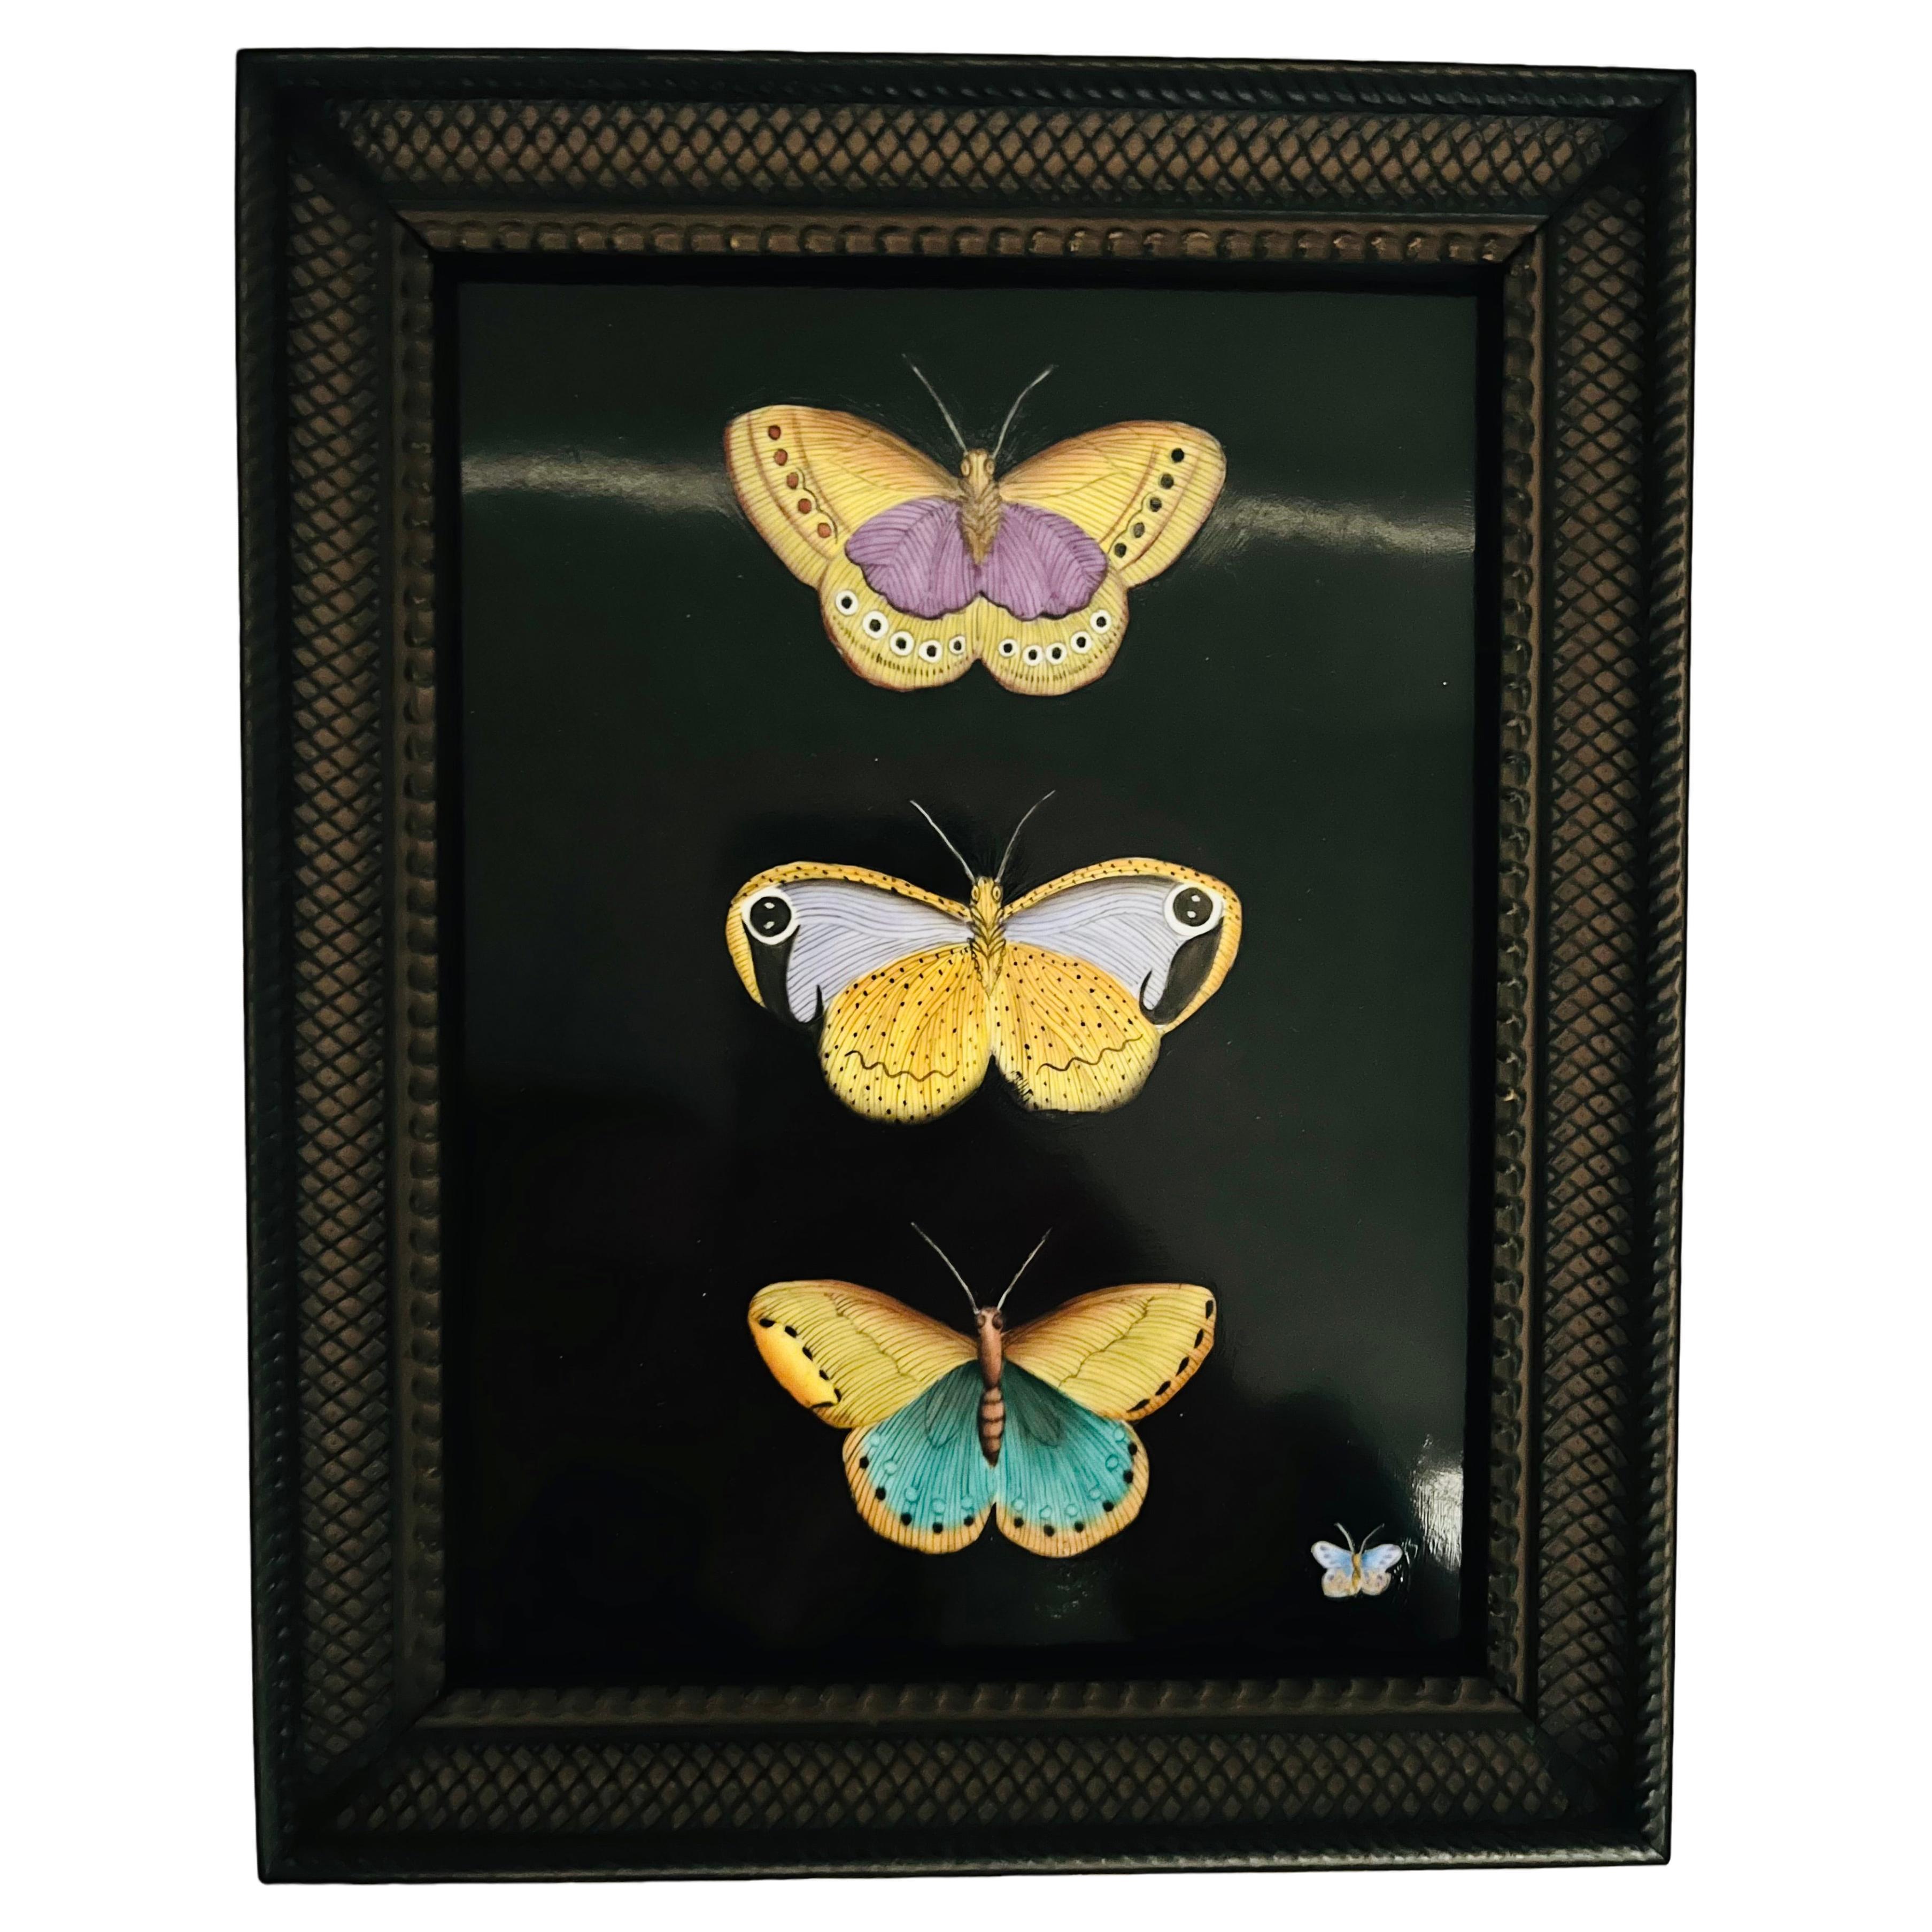 Anna Weatherley Designs - Butterflies Painted on Porcelain